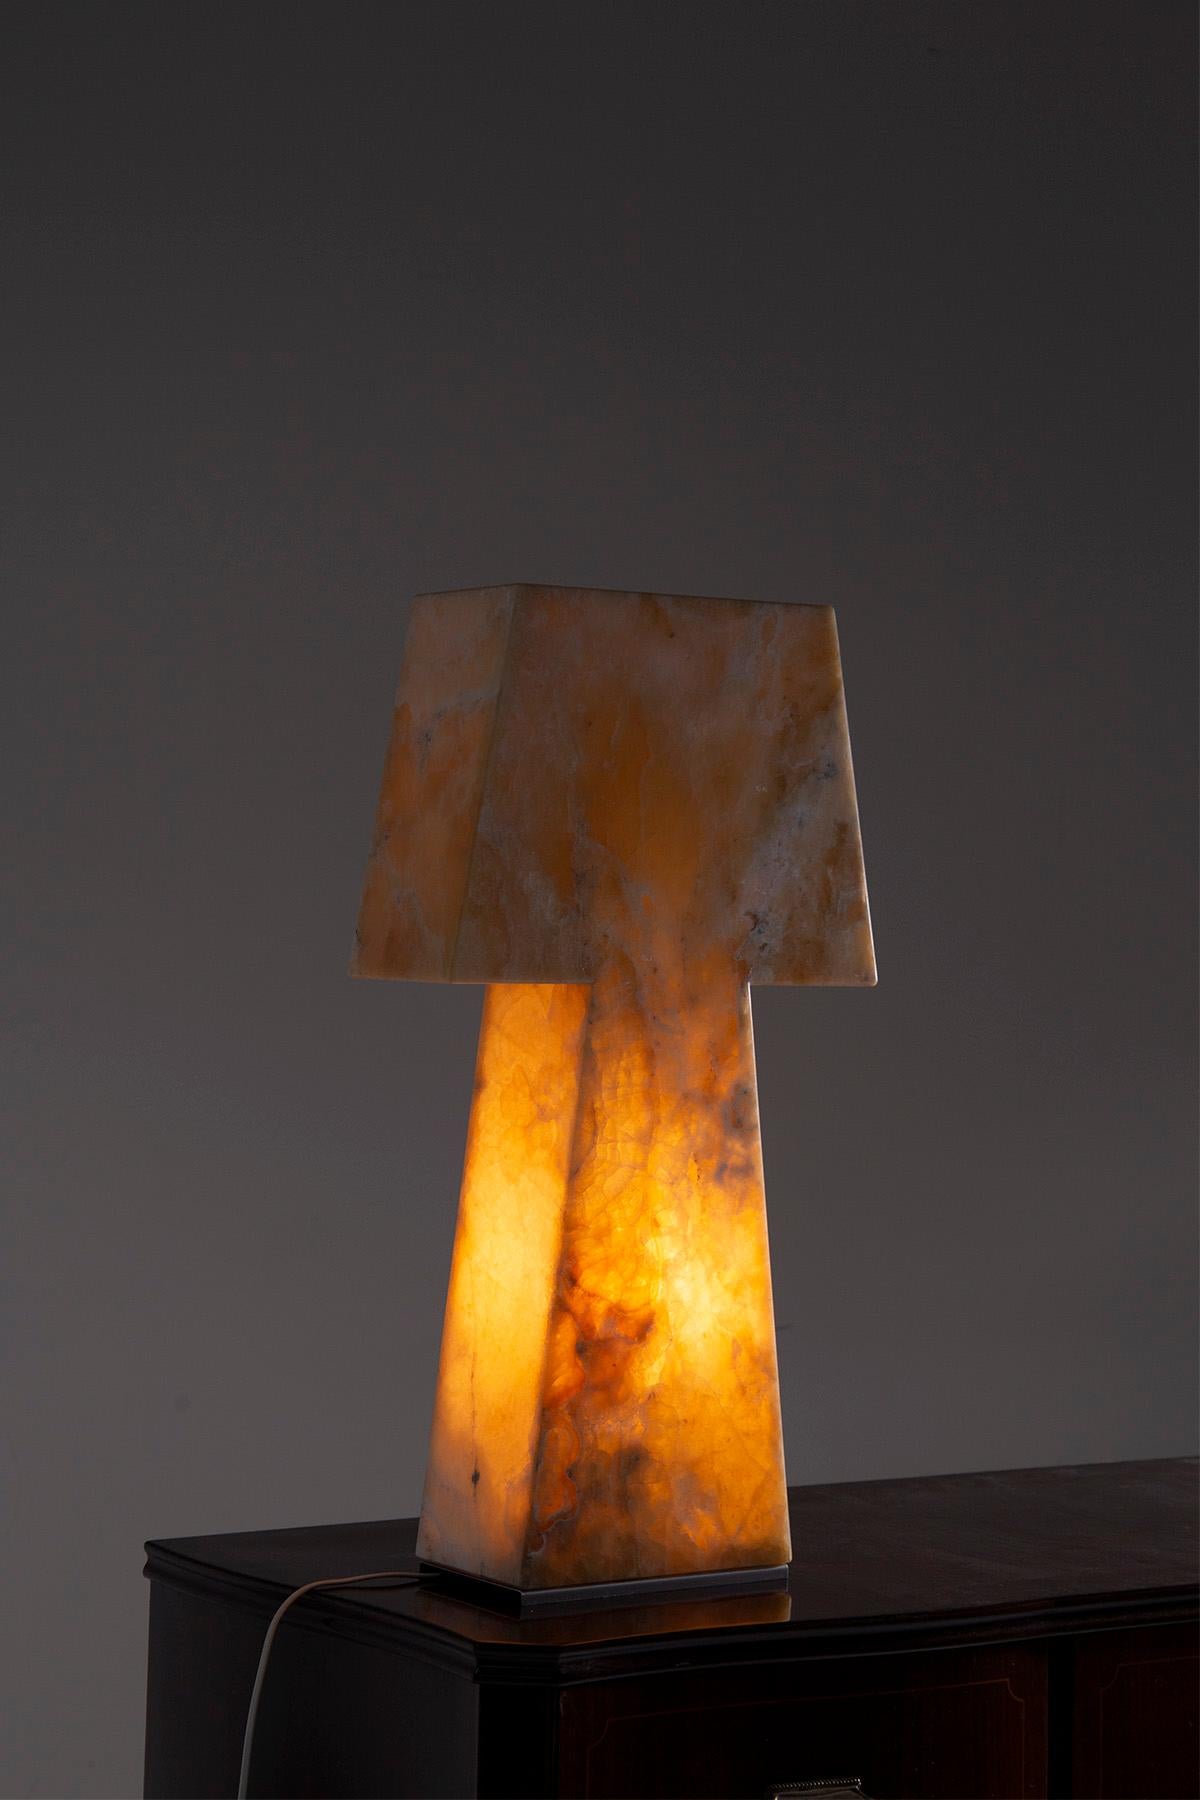 Imagine entering a room adorned with the pure embodiment of refinement and craftsmanship. A magnificent contemporary piece from the heart of Made in Italy, this contemporary table lamp is a testament to timeless elegance. Carved from exquisite onyx